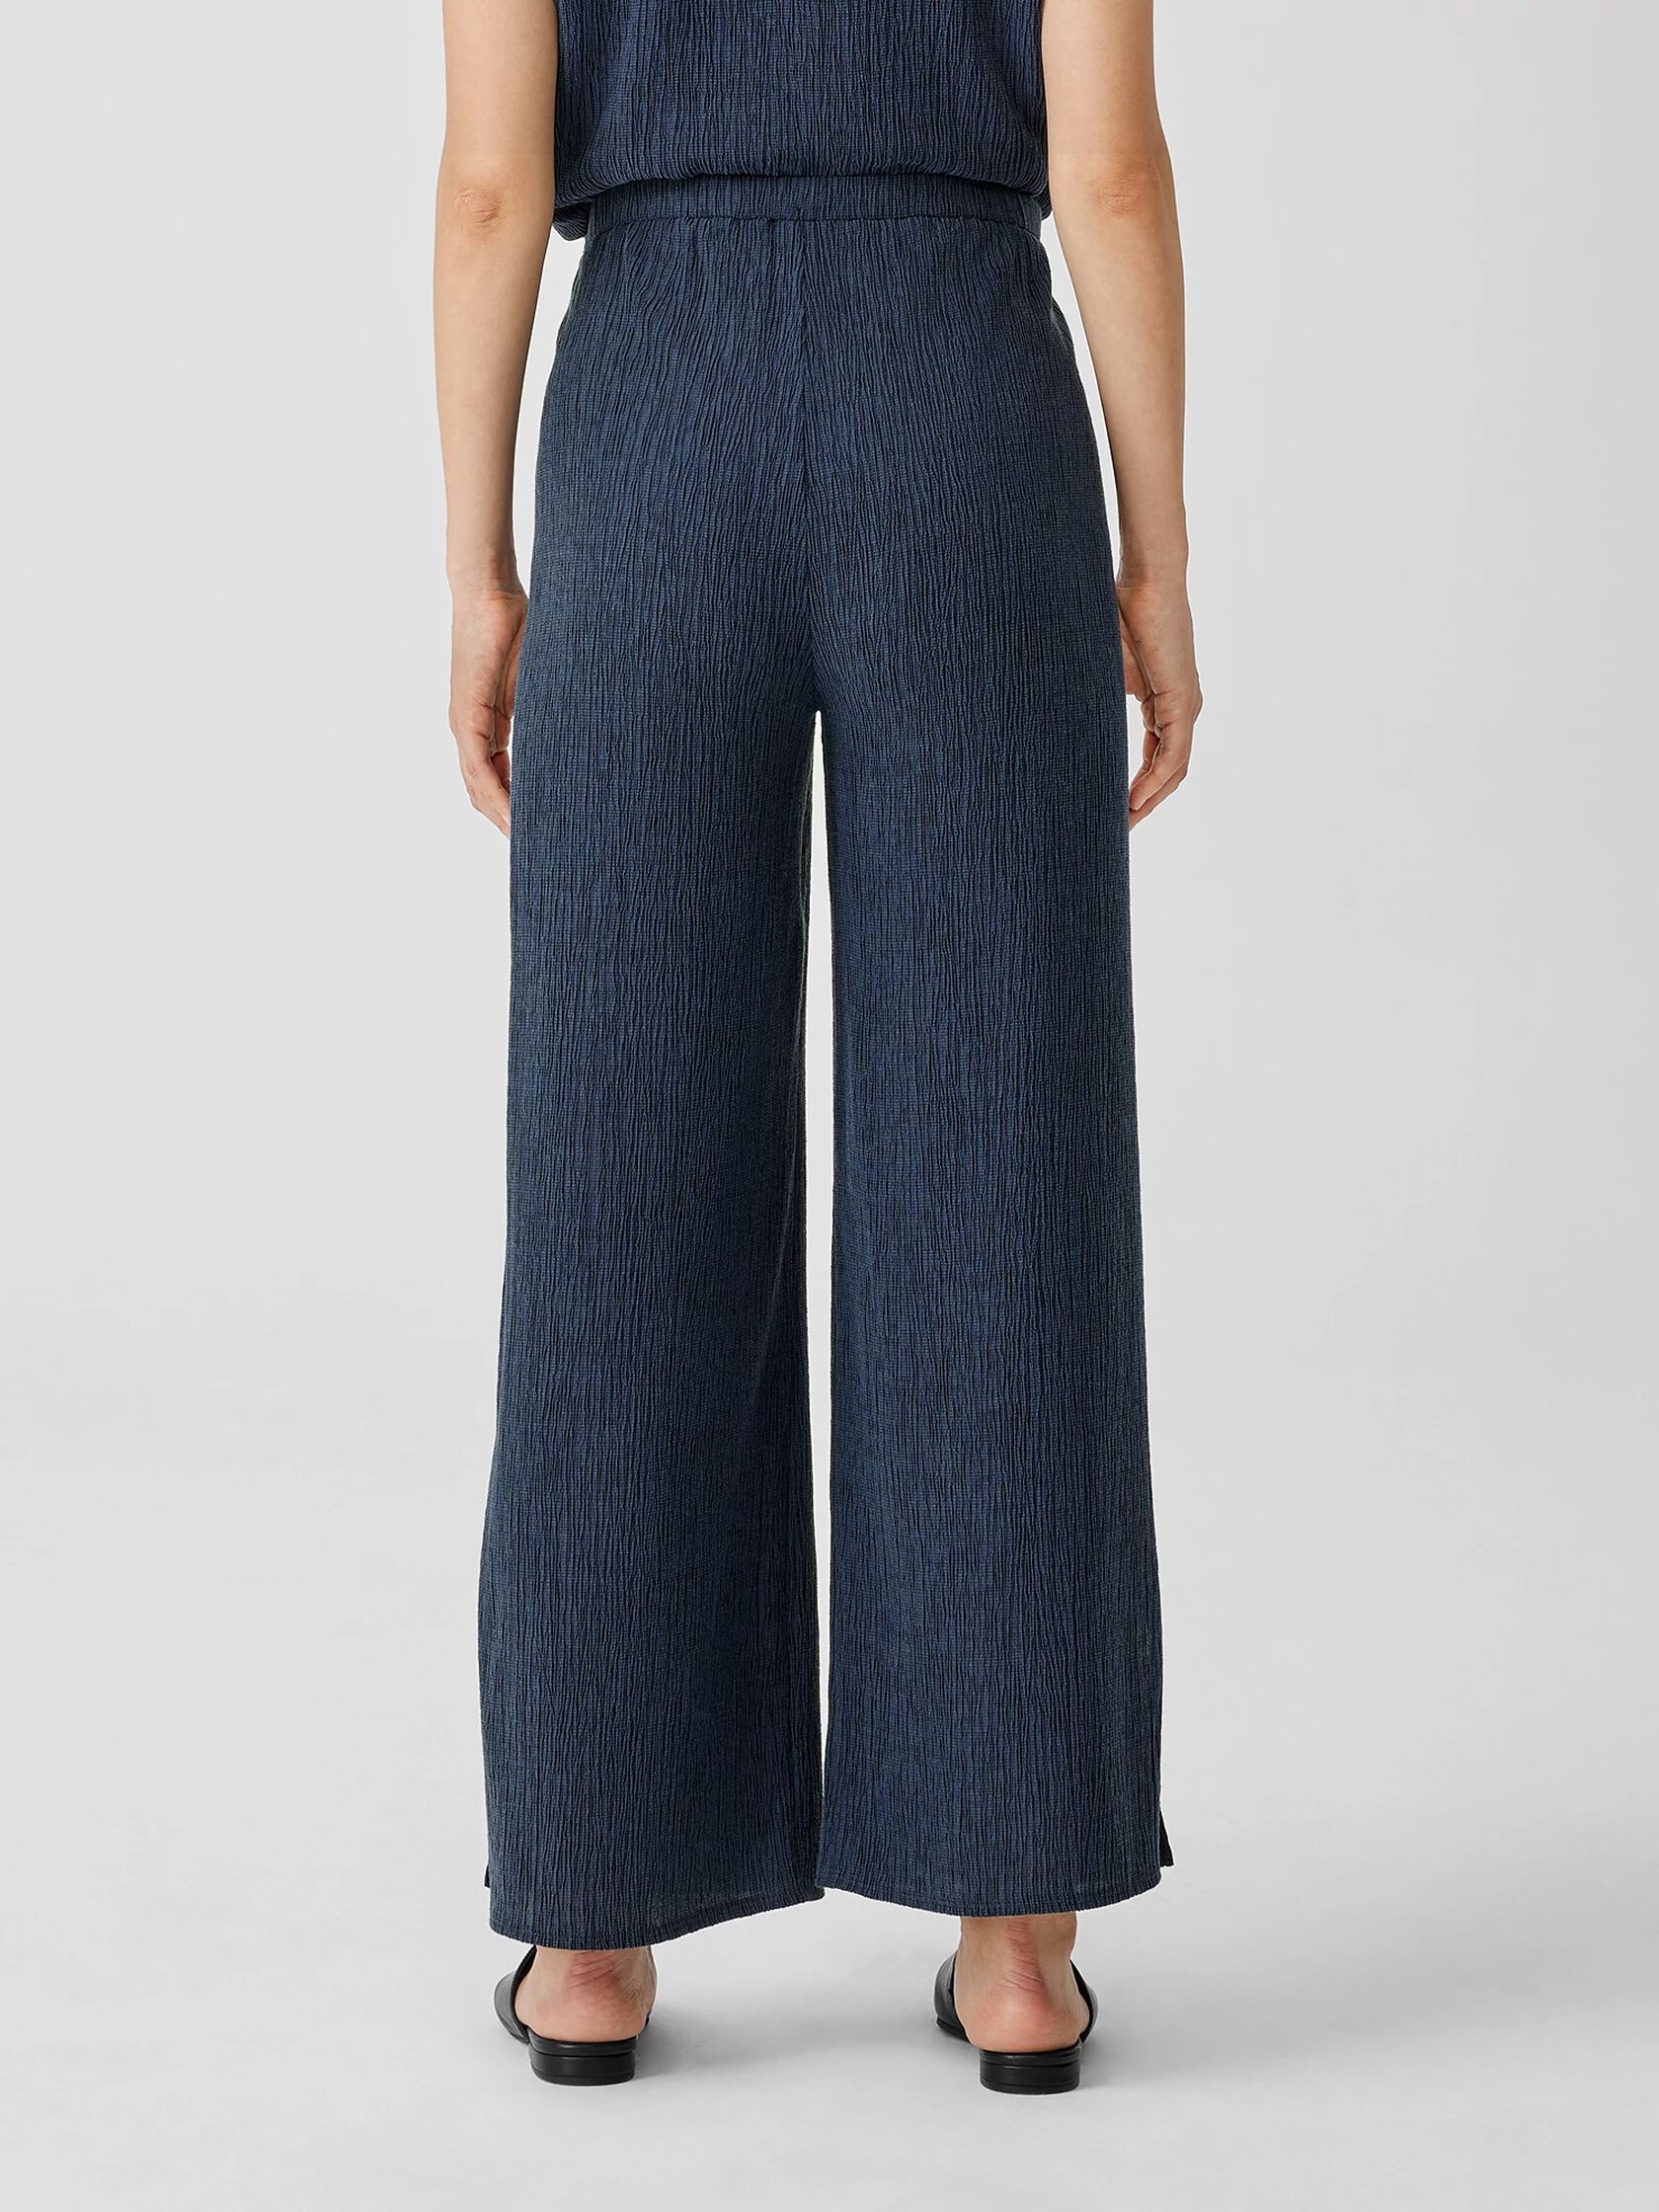 Woven Plisse Straight Pant | EILEEN FISHER